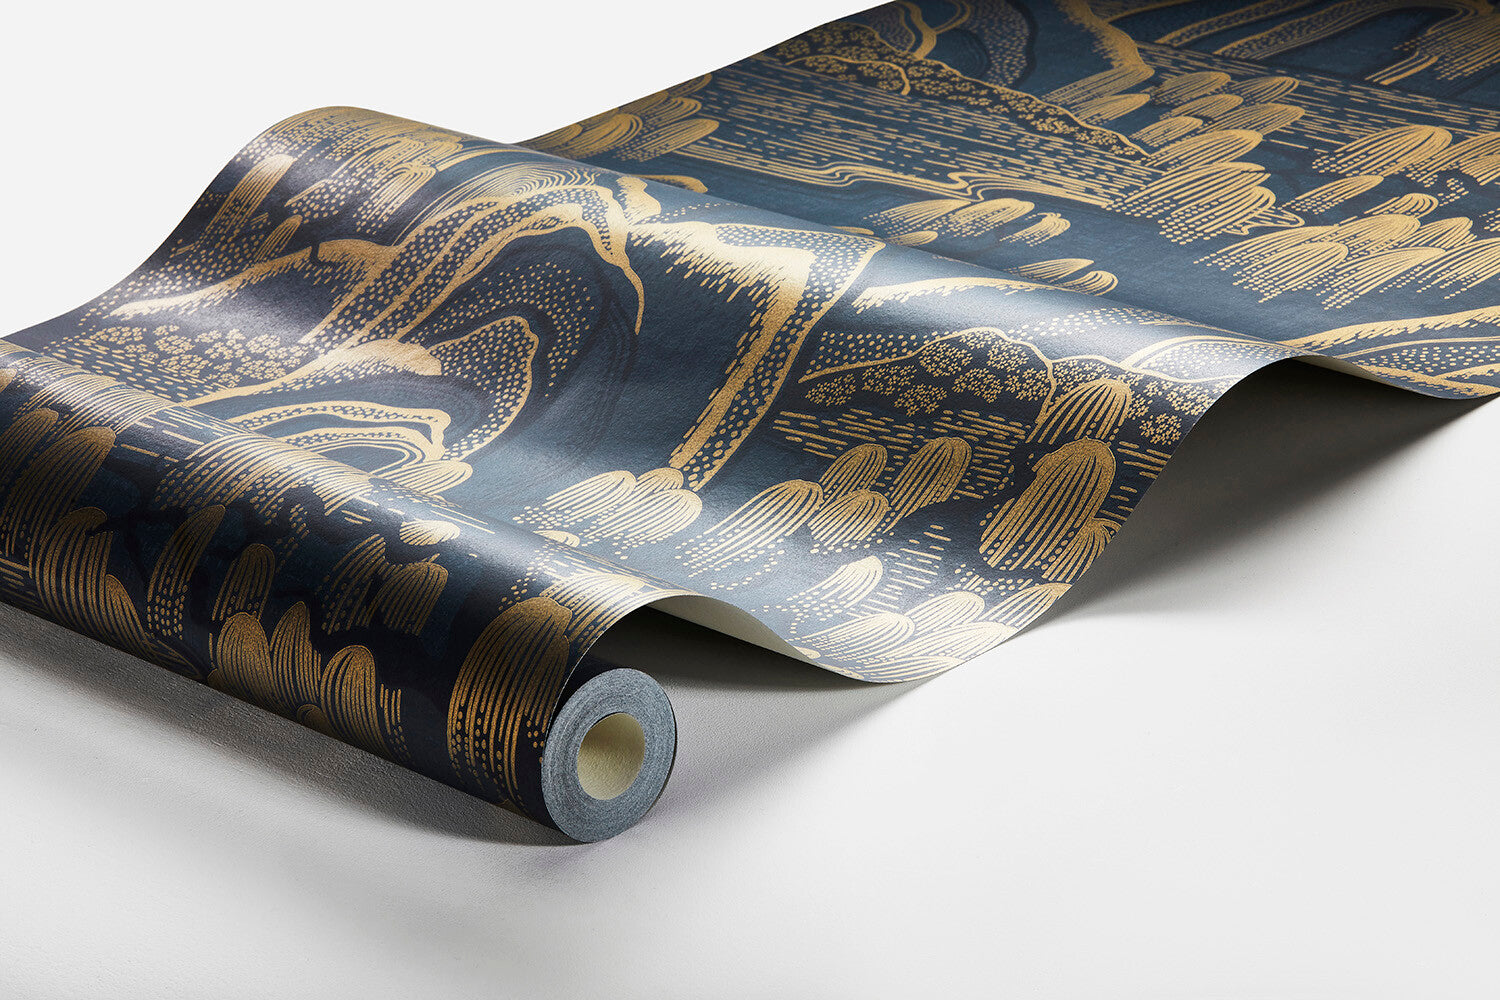 Coloured in shades of blue and dramatic gold detailing, our Indigo Garden wallpaper will add an element of opulence to your interior.